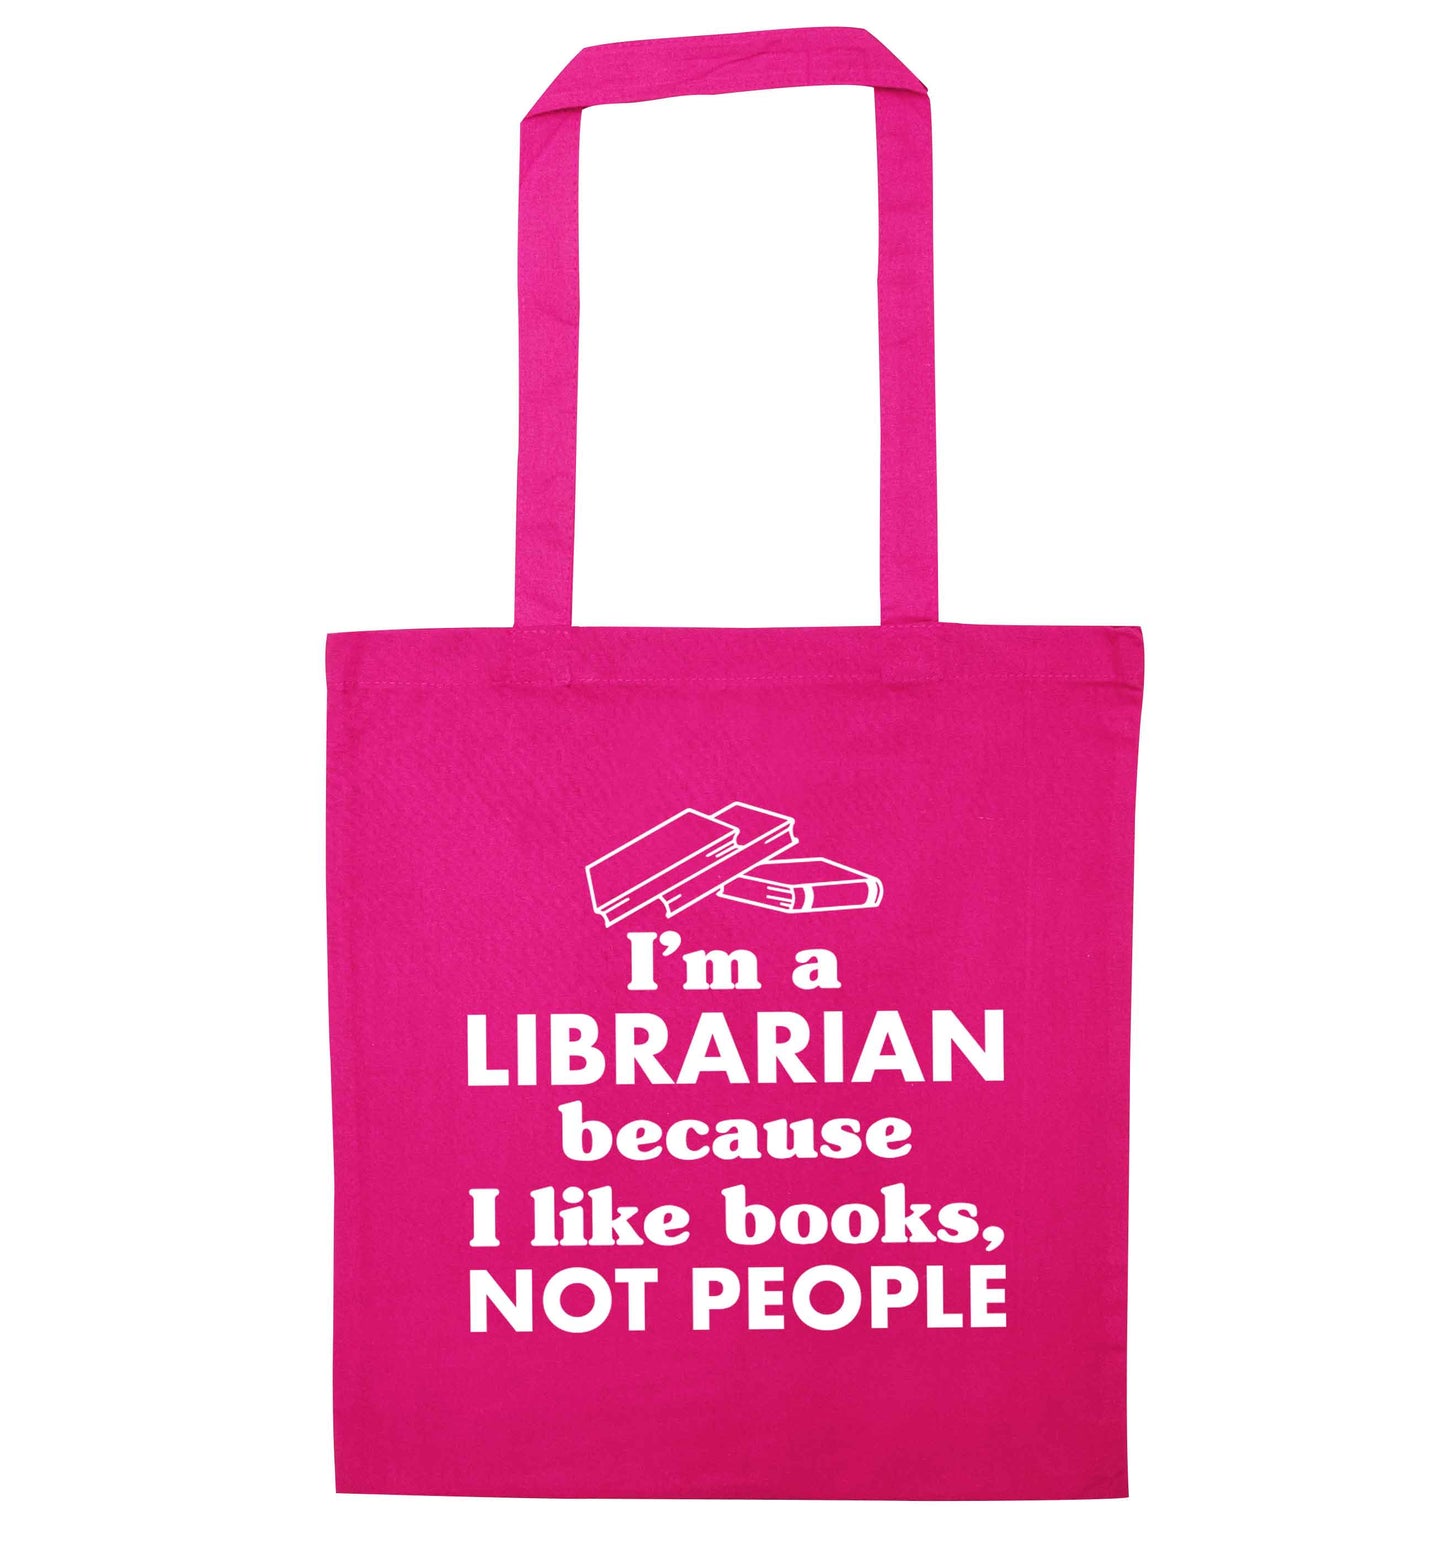 I'm a librarian because I like books not people pink tote bag